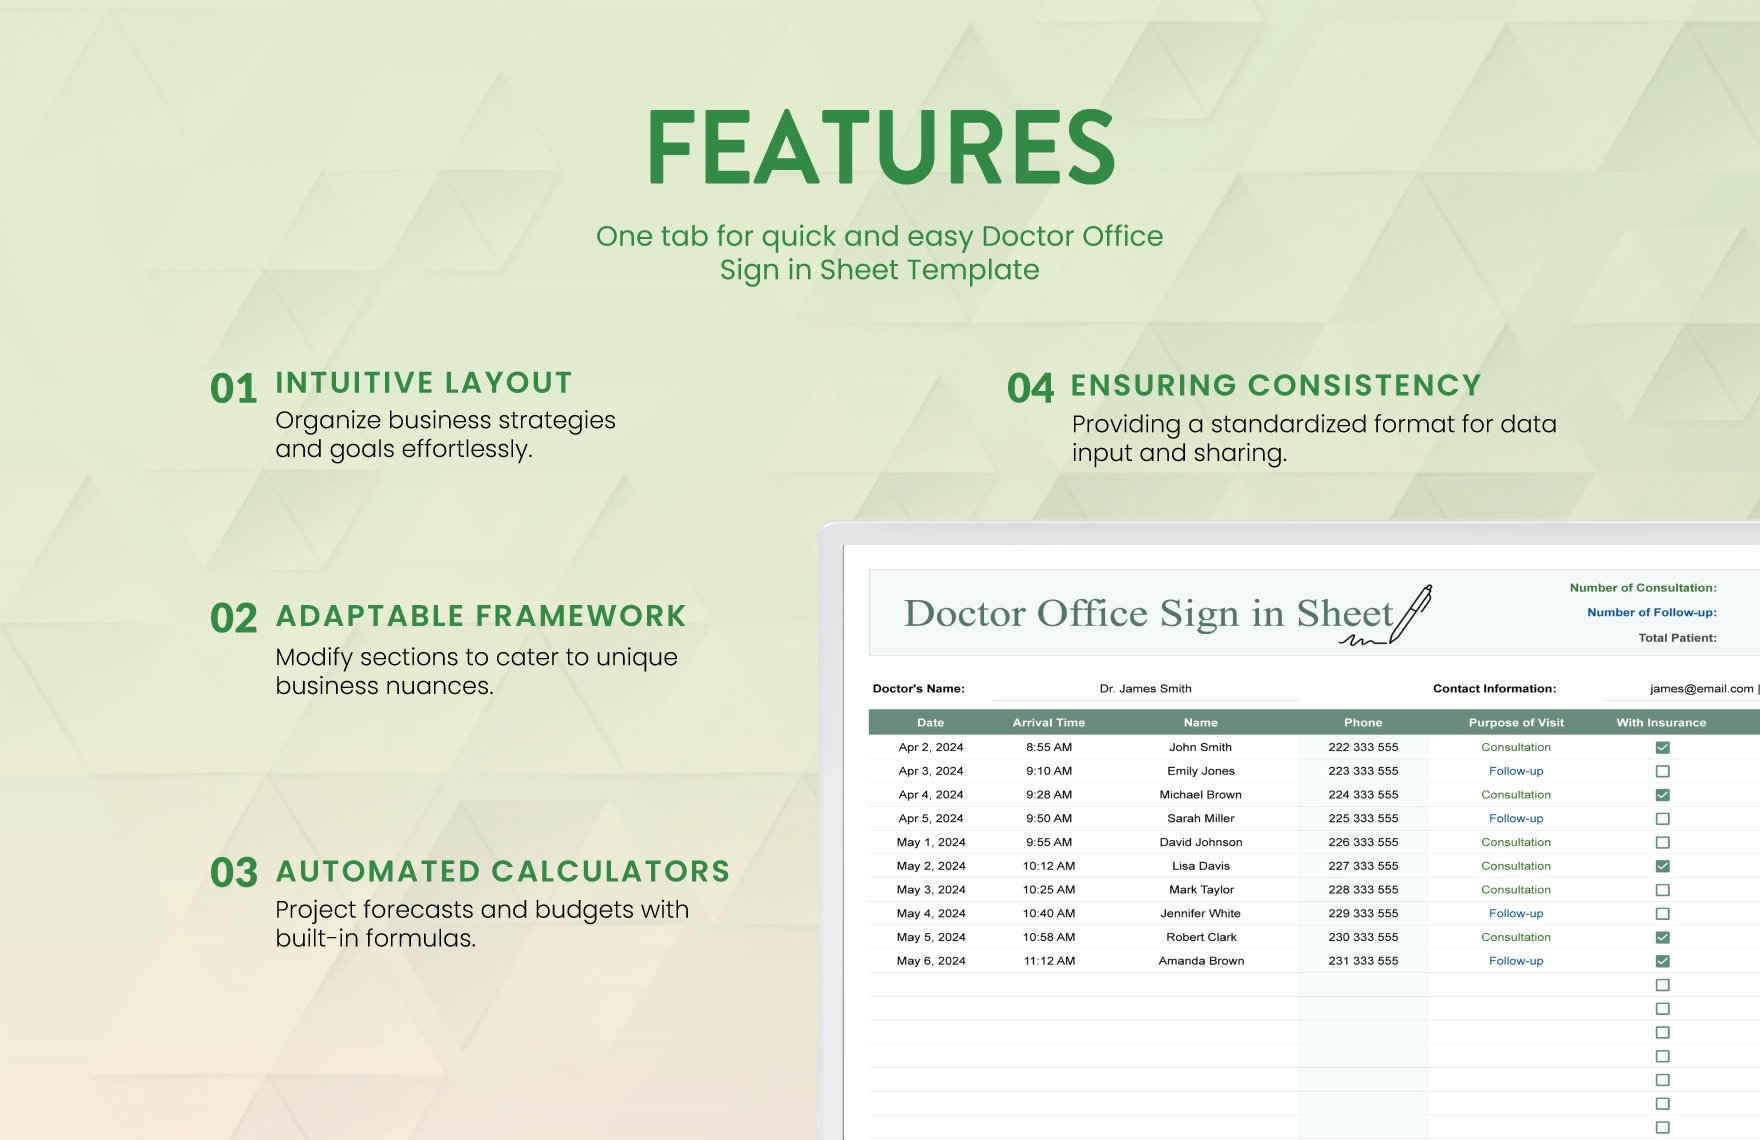 Doctor Office Sign in Sheet Template